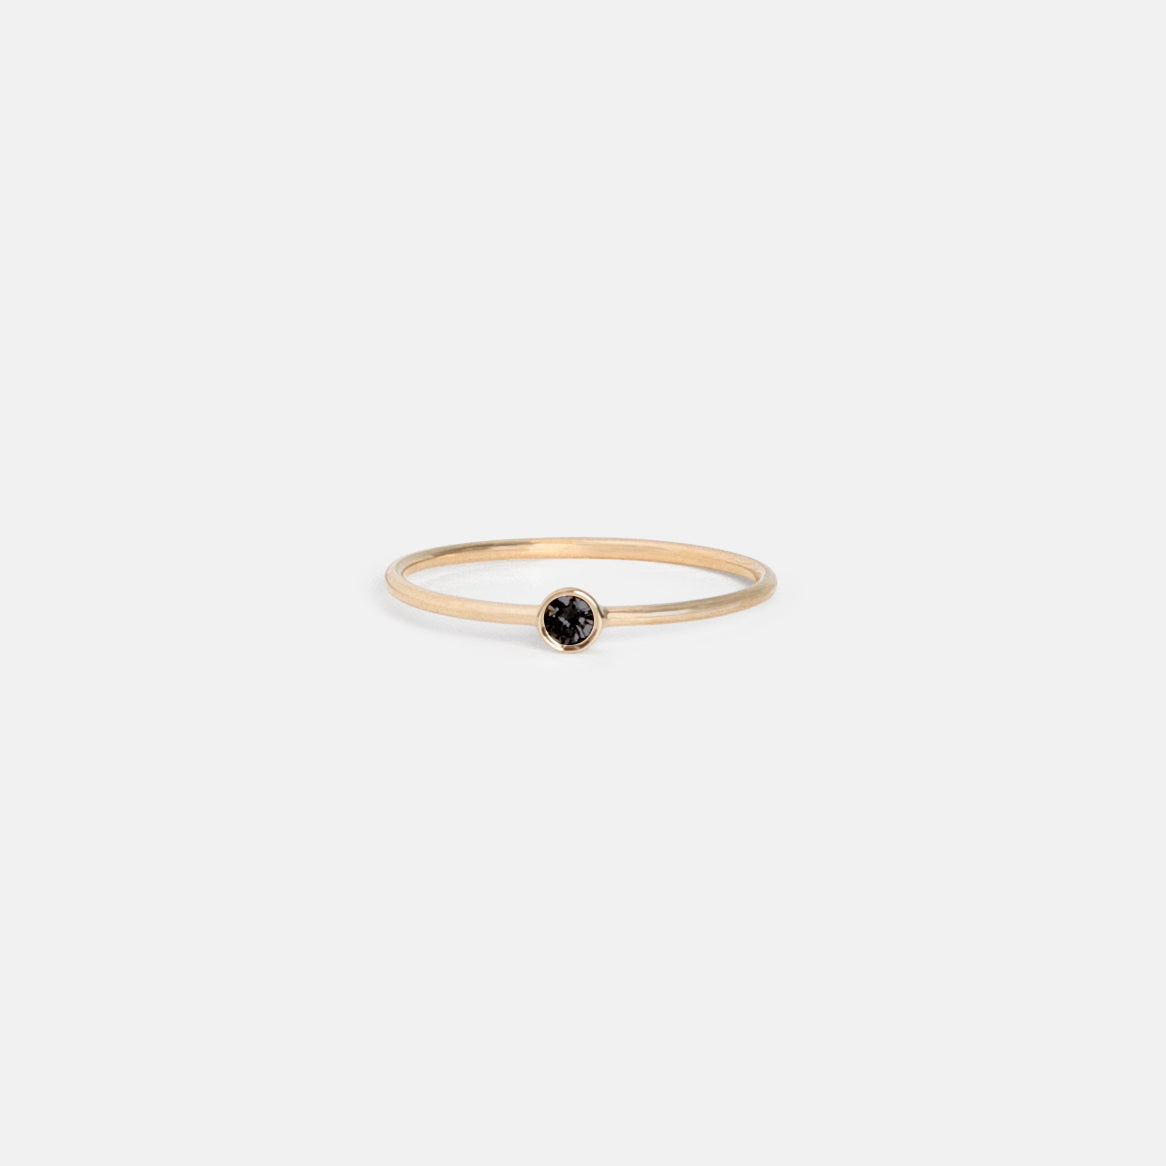 Large Kaya Ring in 14k Gold set with Black Diamond by SHW Fine Jewelry